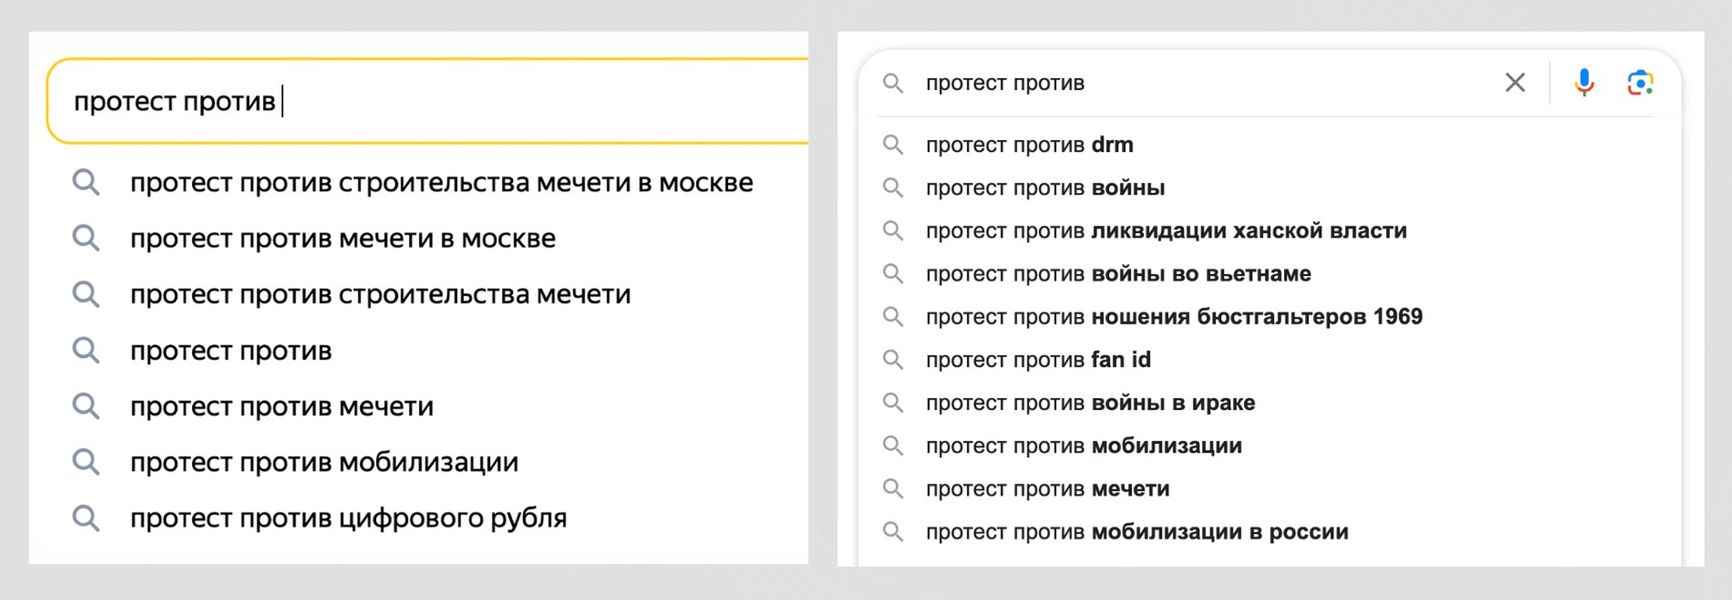 Examples of Yandex and Google search prompts for the phrase “protest against”